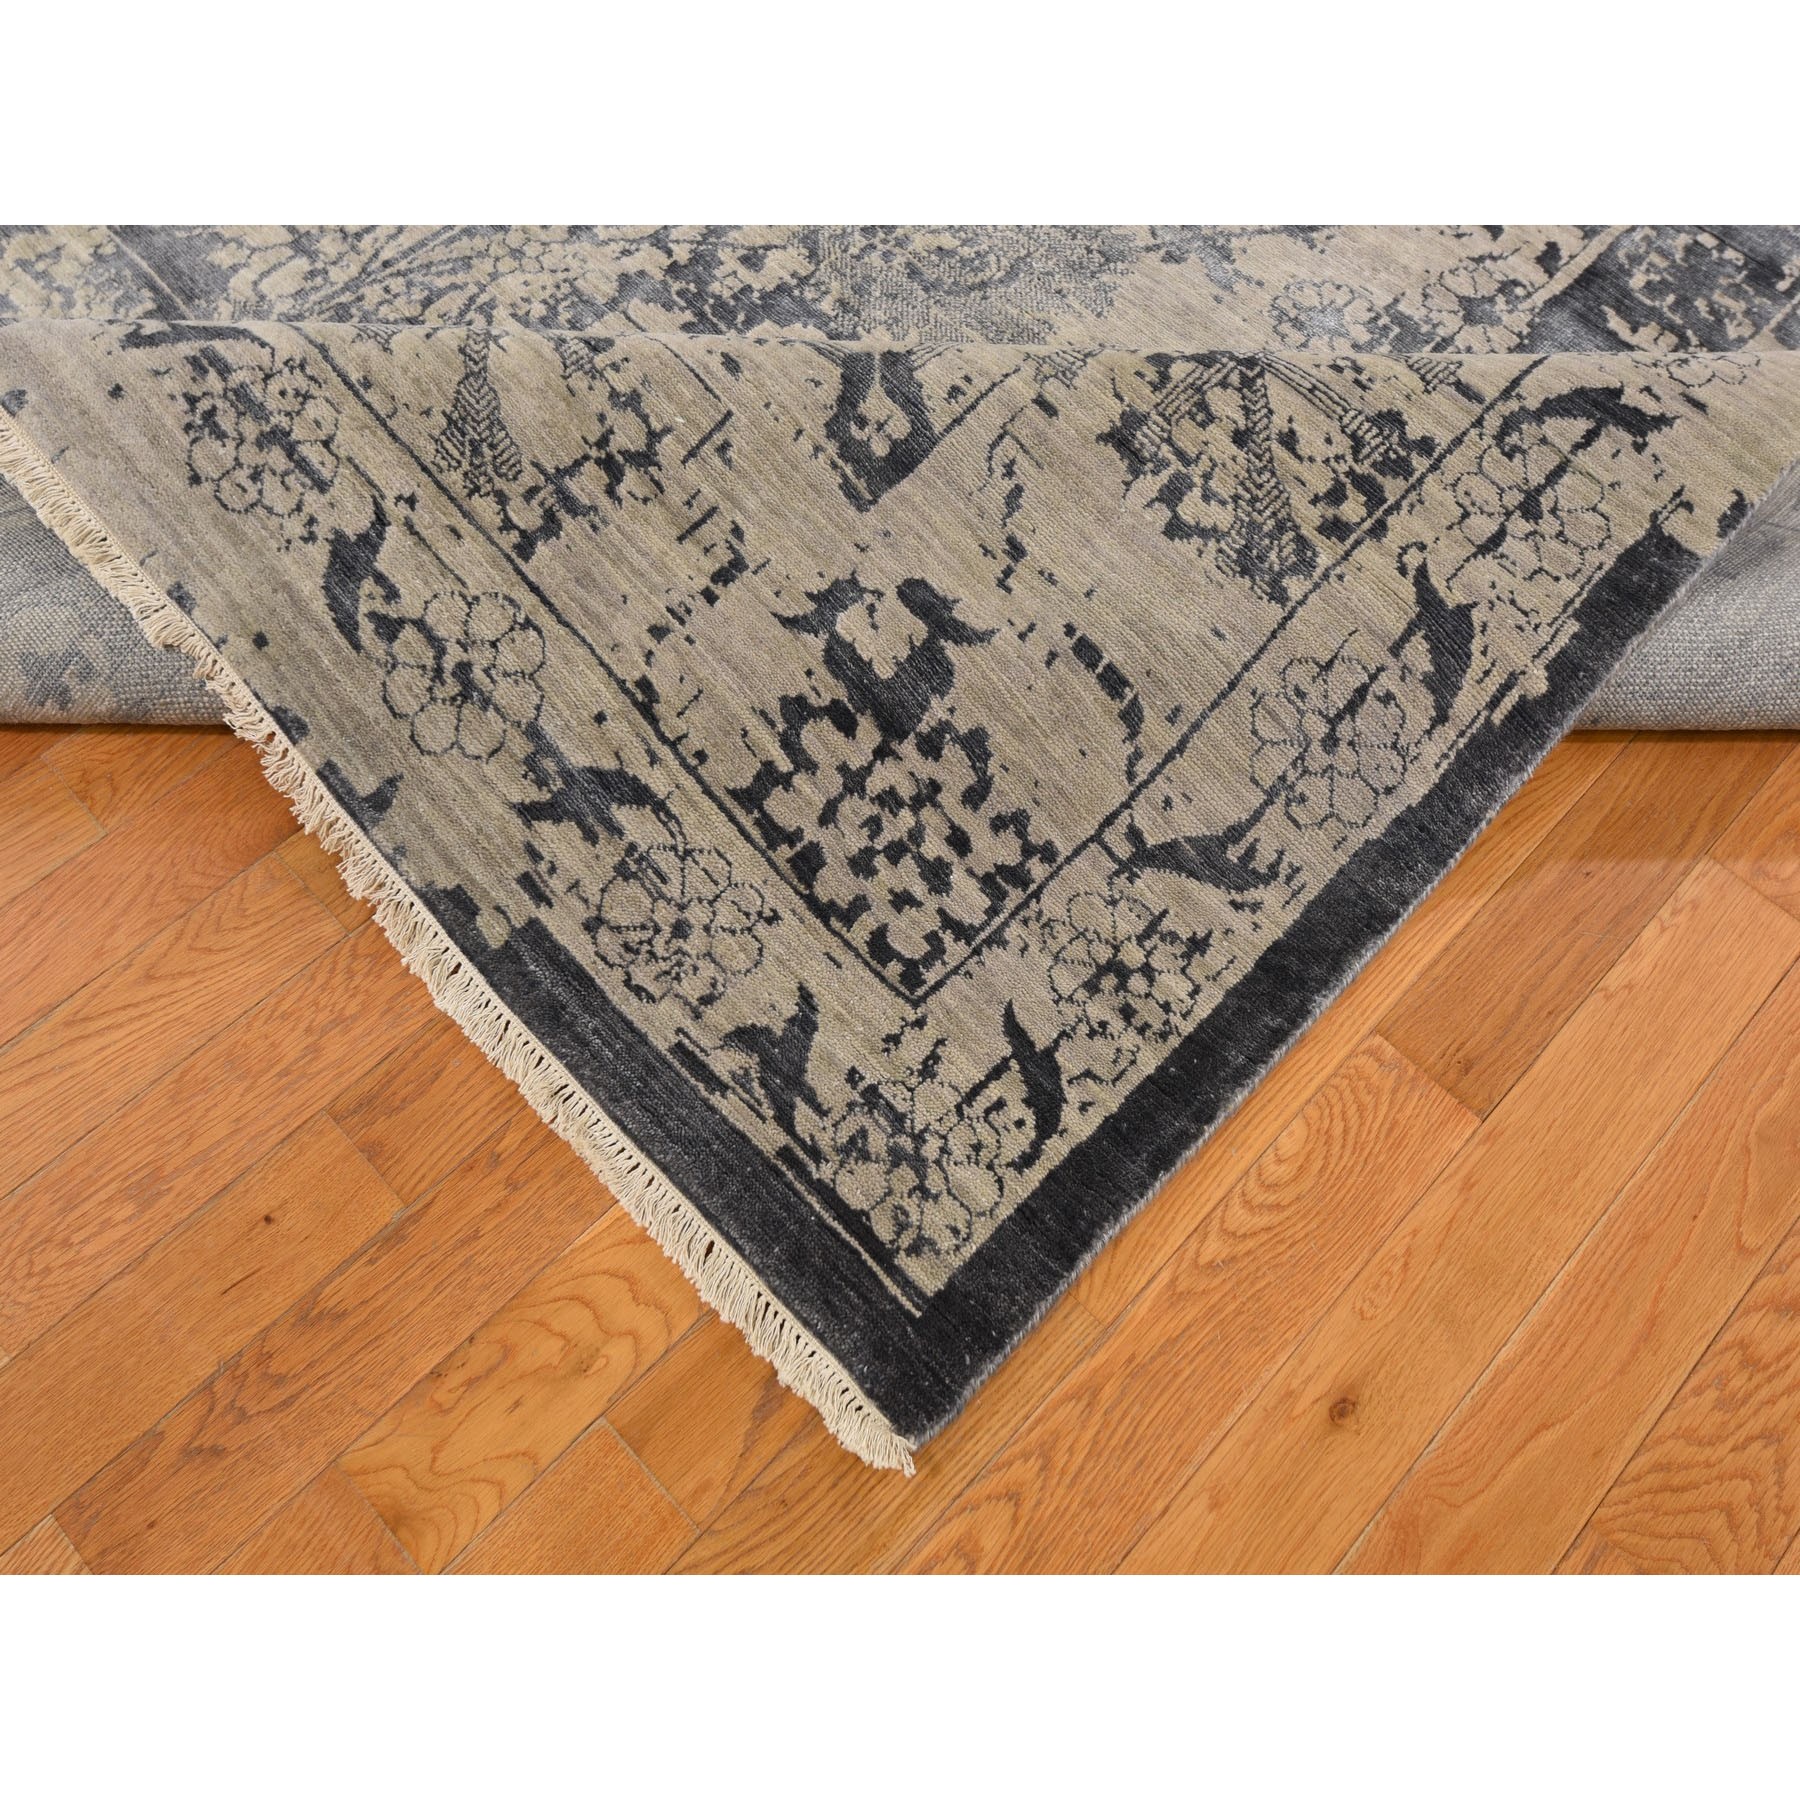 9'1"x12' Gray Wool And Silk Transitional Erased Persian Design Hand Woven Oriental Rug 